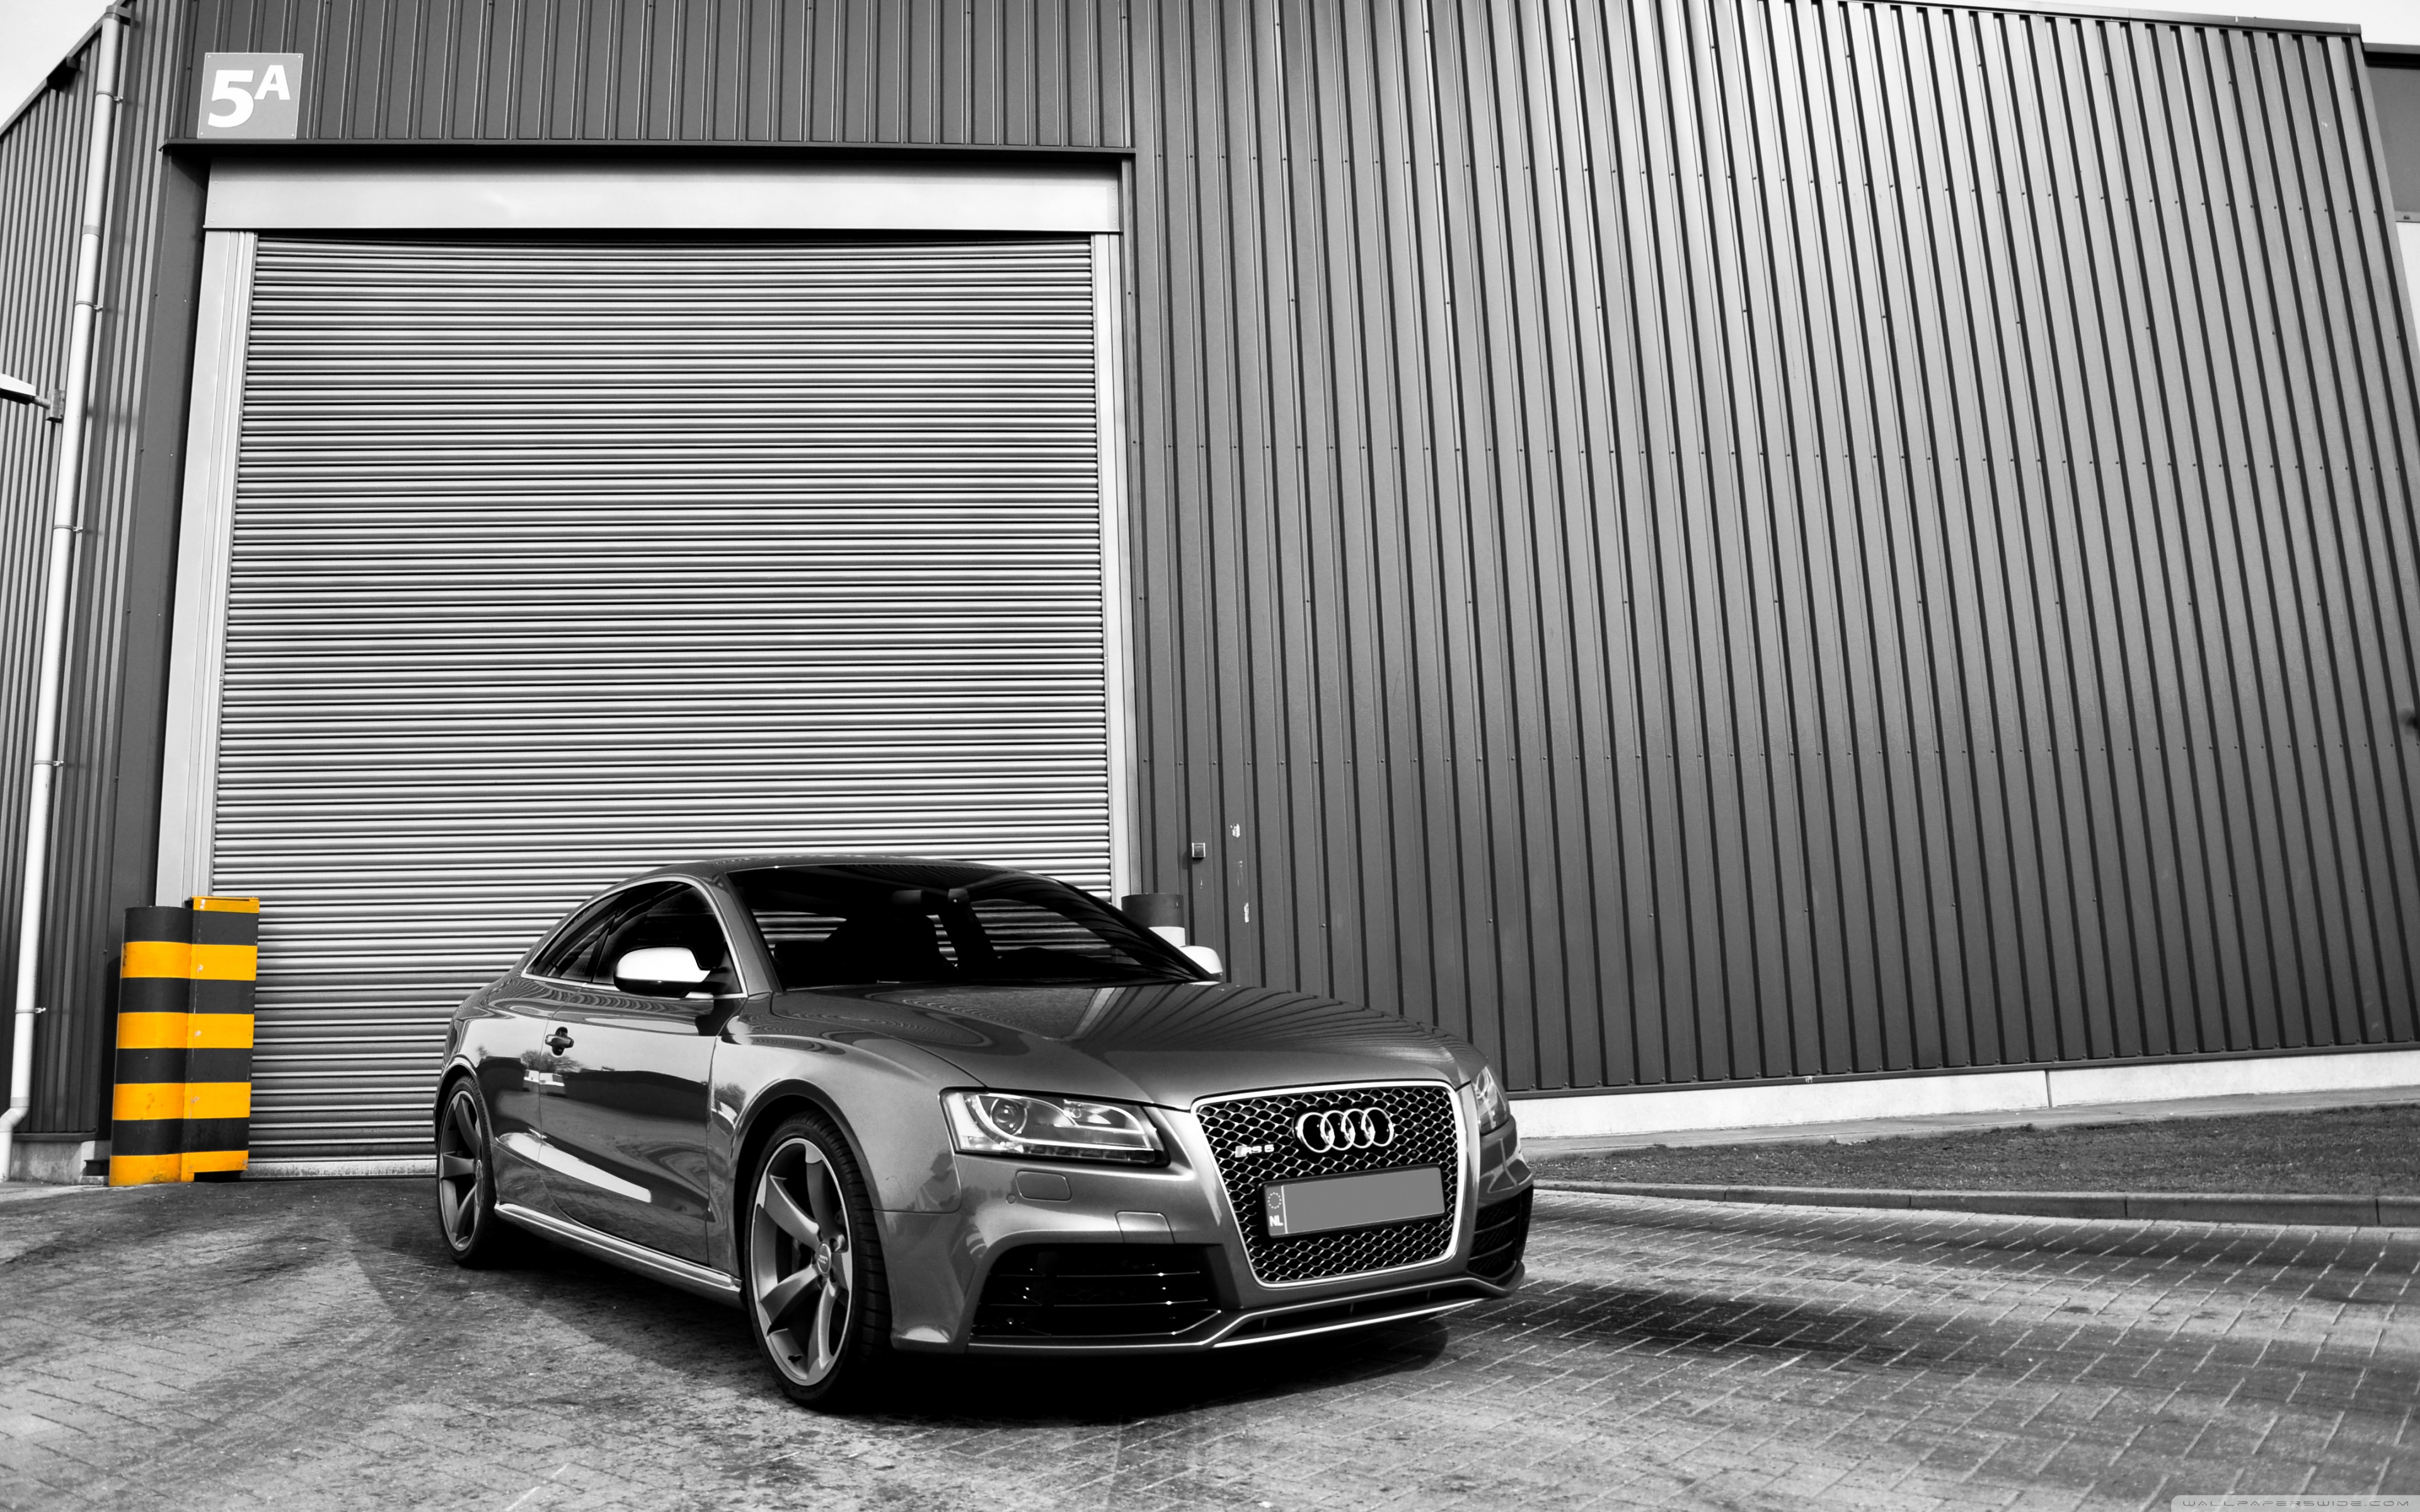 Audi Rs5 Gray Ultra Hd Desktop Background Wallpaper For Multi Display Dual Monitor Tablet Smartphone